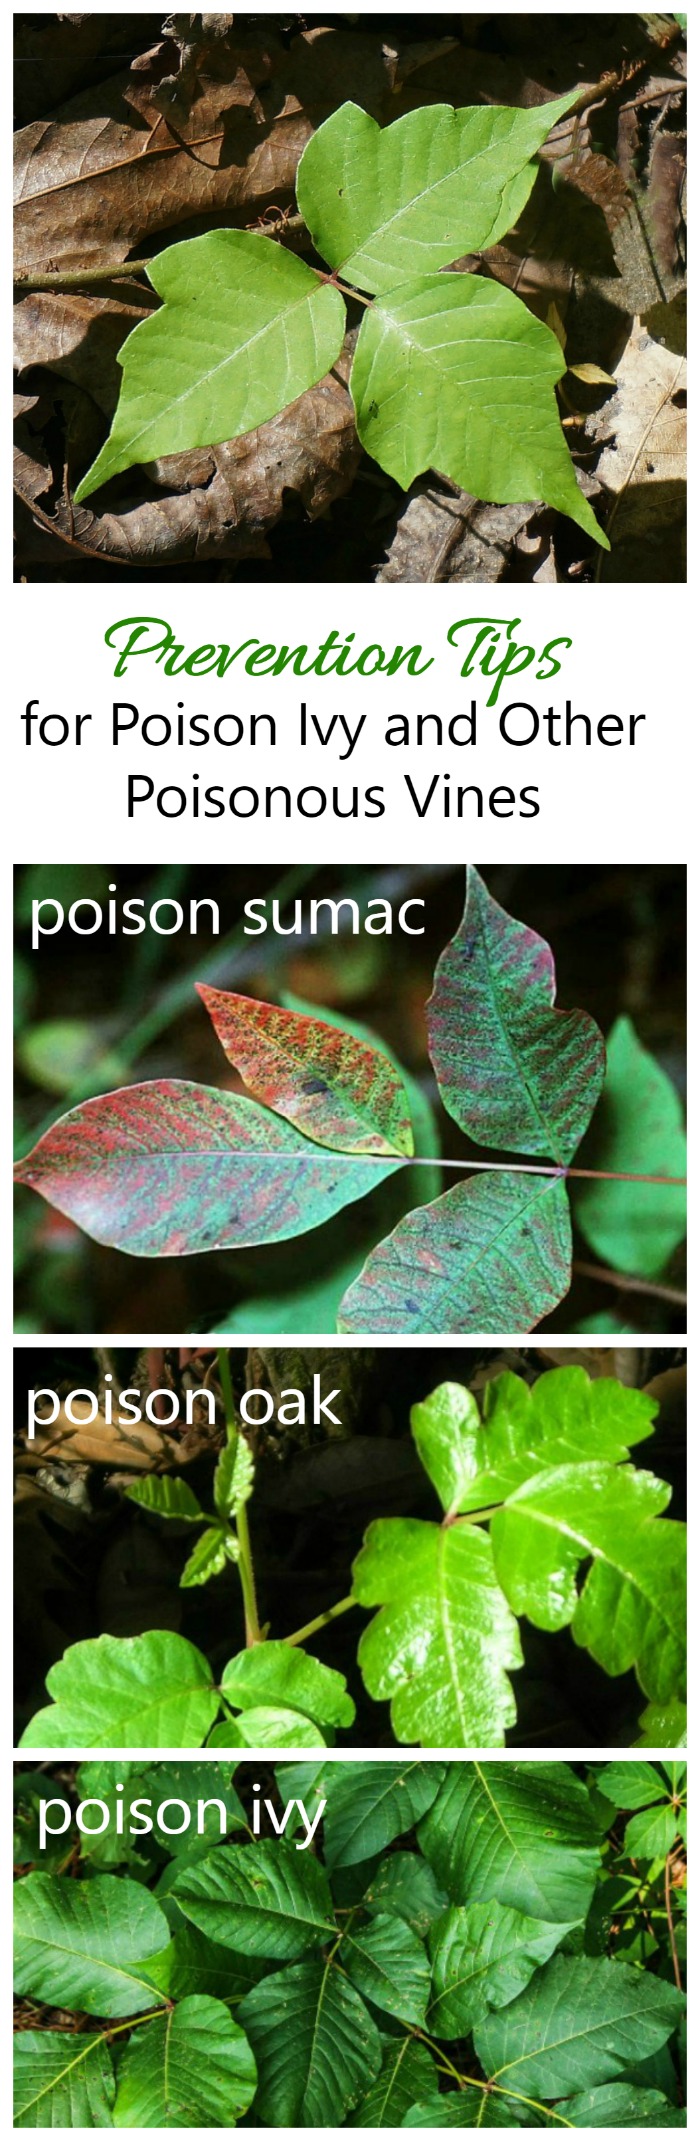 Natural tips for poison ivy prevention without resorting to harsh chemicals